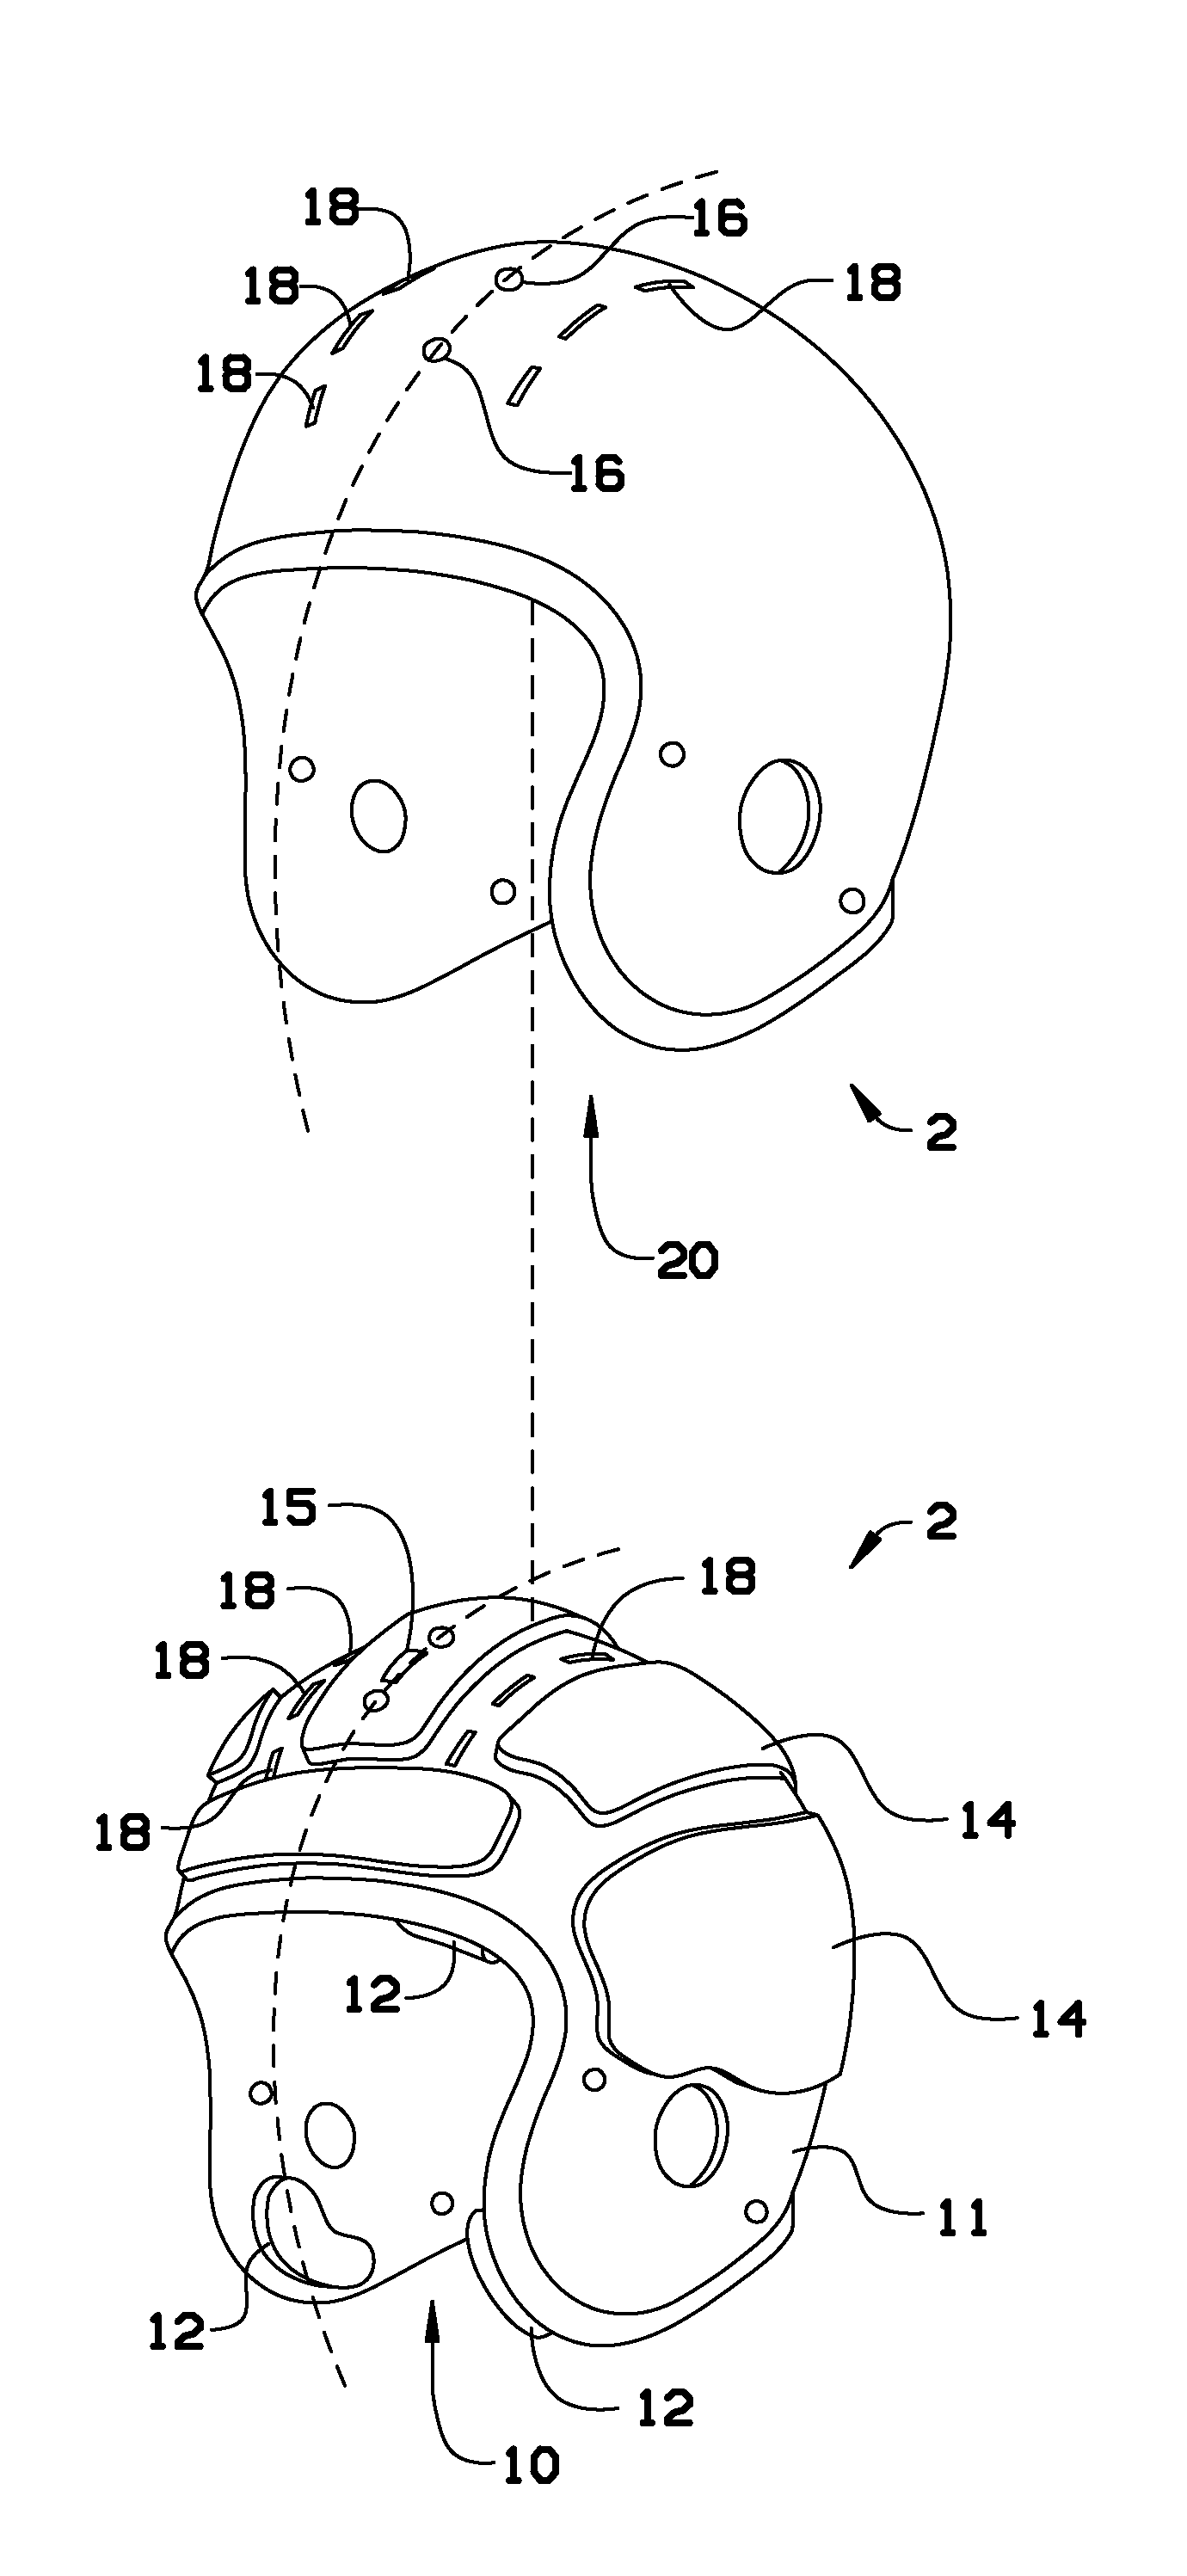 Method and apparatus for an adaptive impact absorbing helmet system